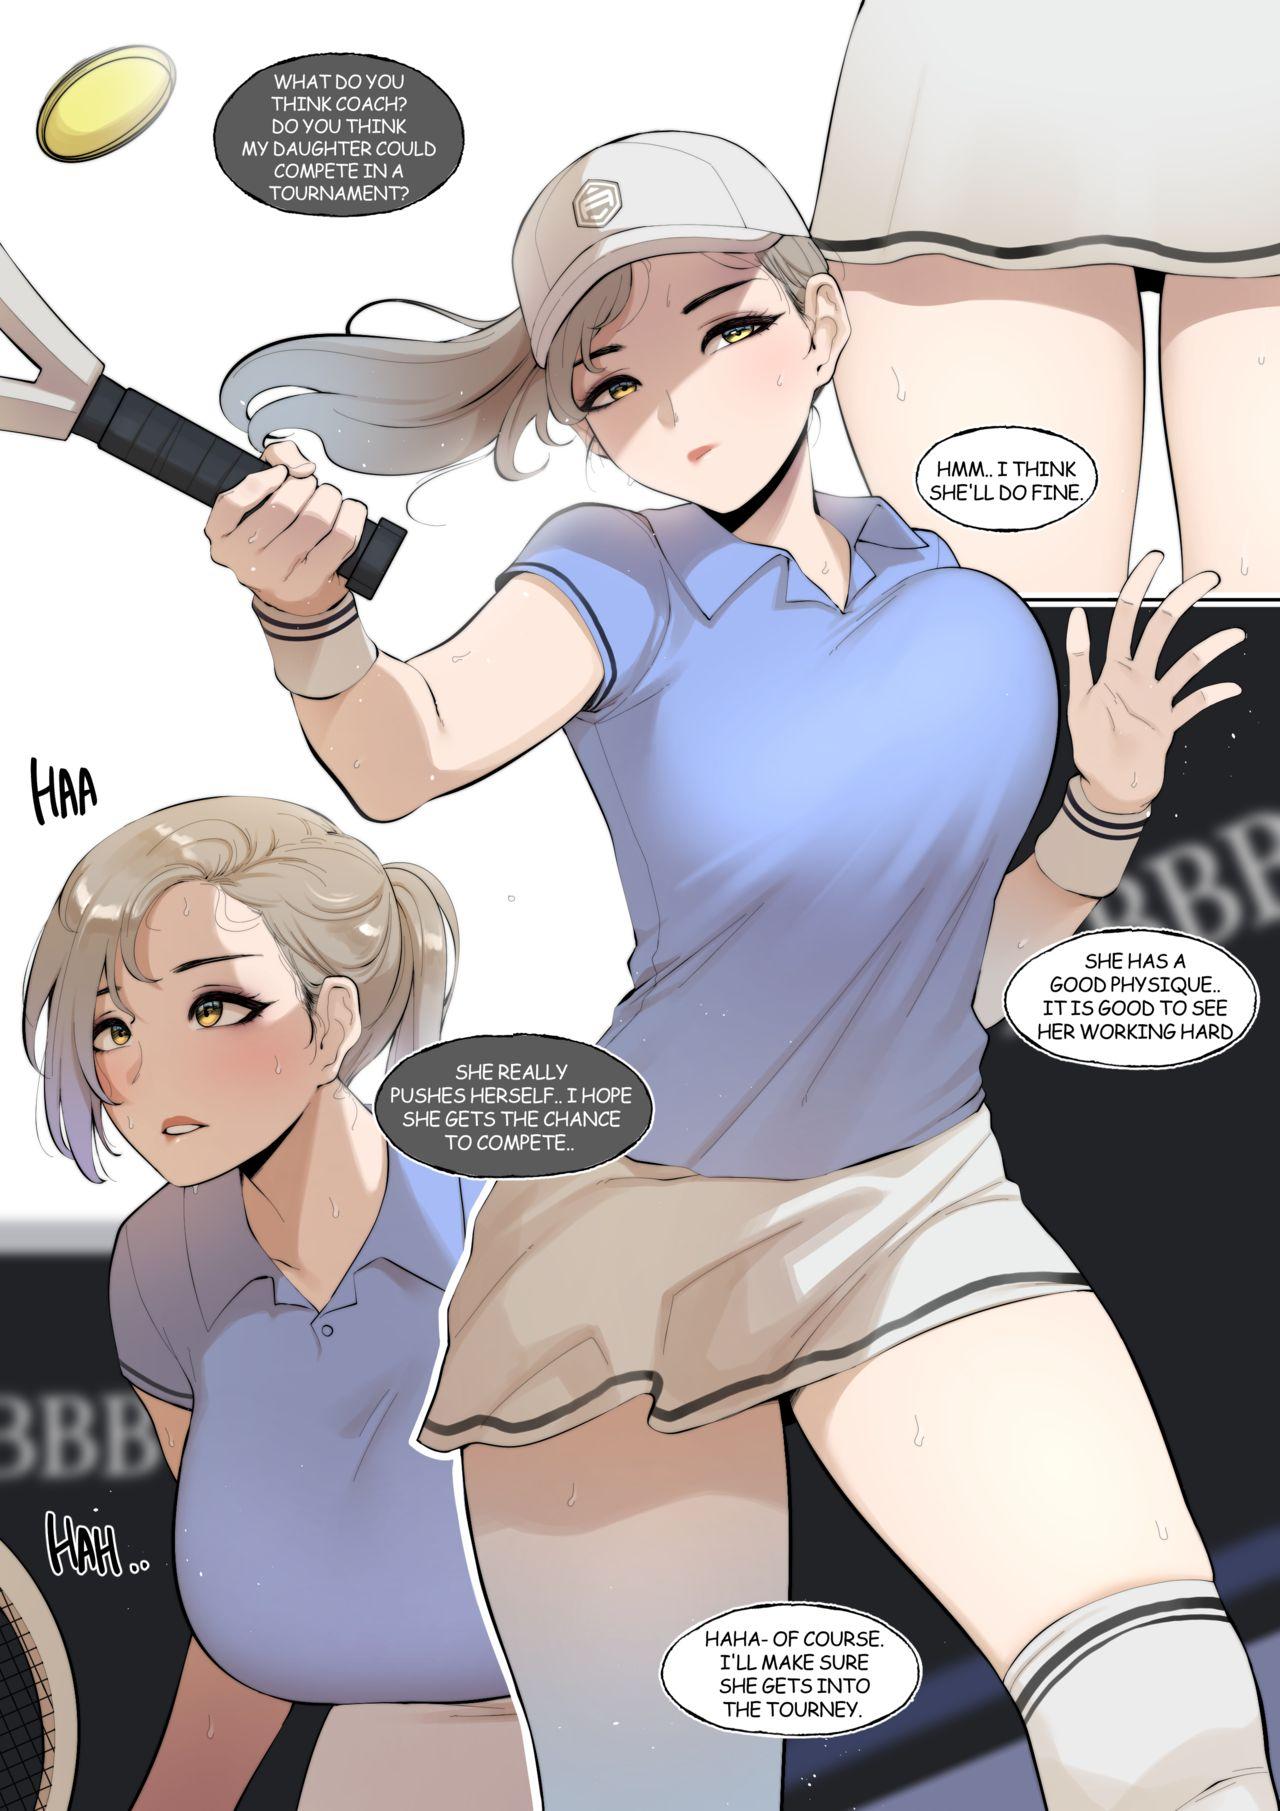 It's Normal for us to Have Sex if You Lose Right? Tennis edition 1